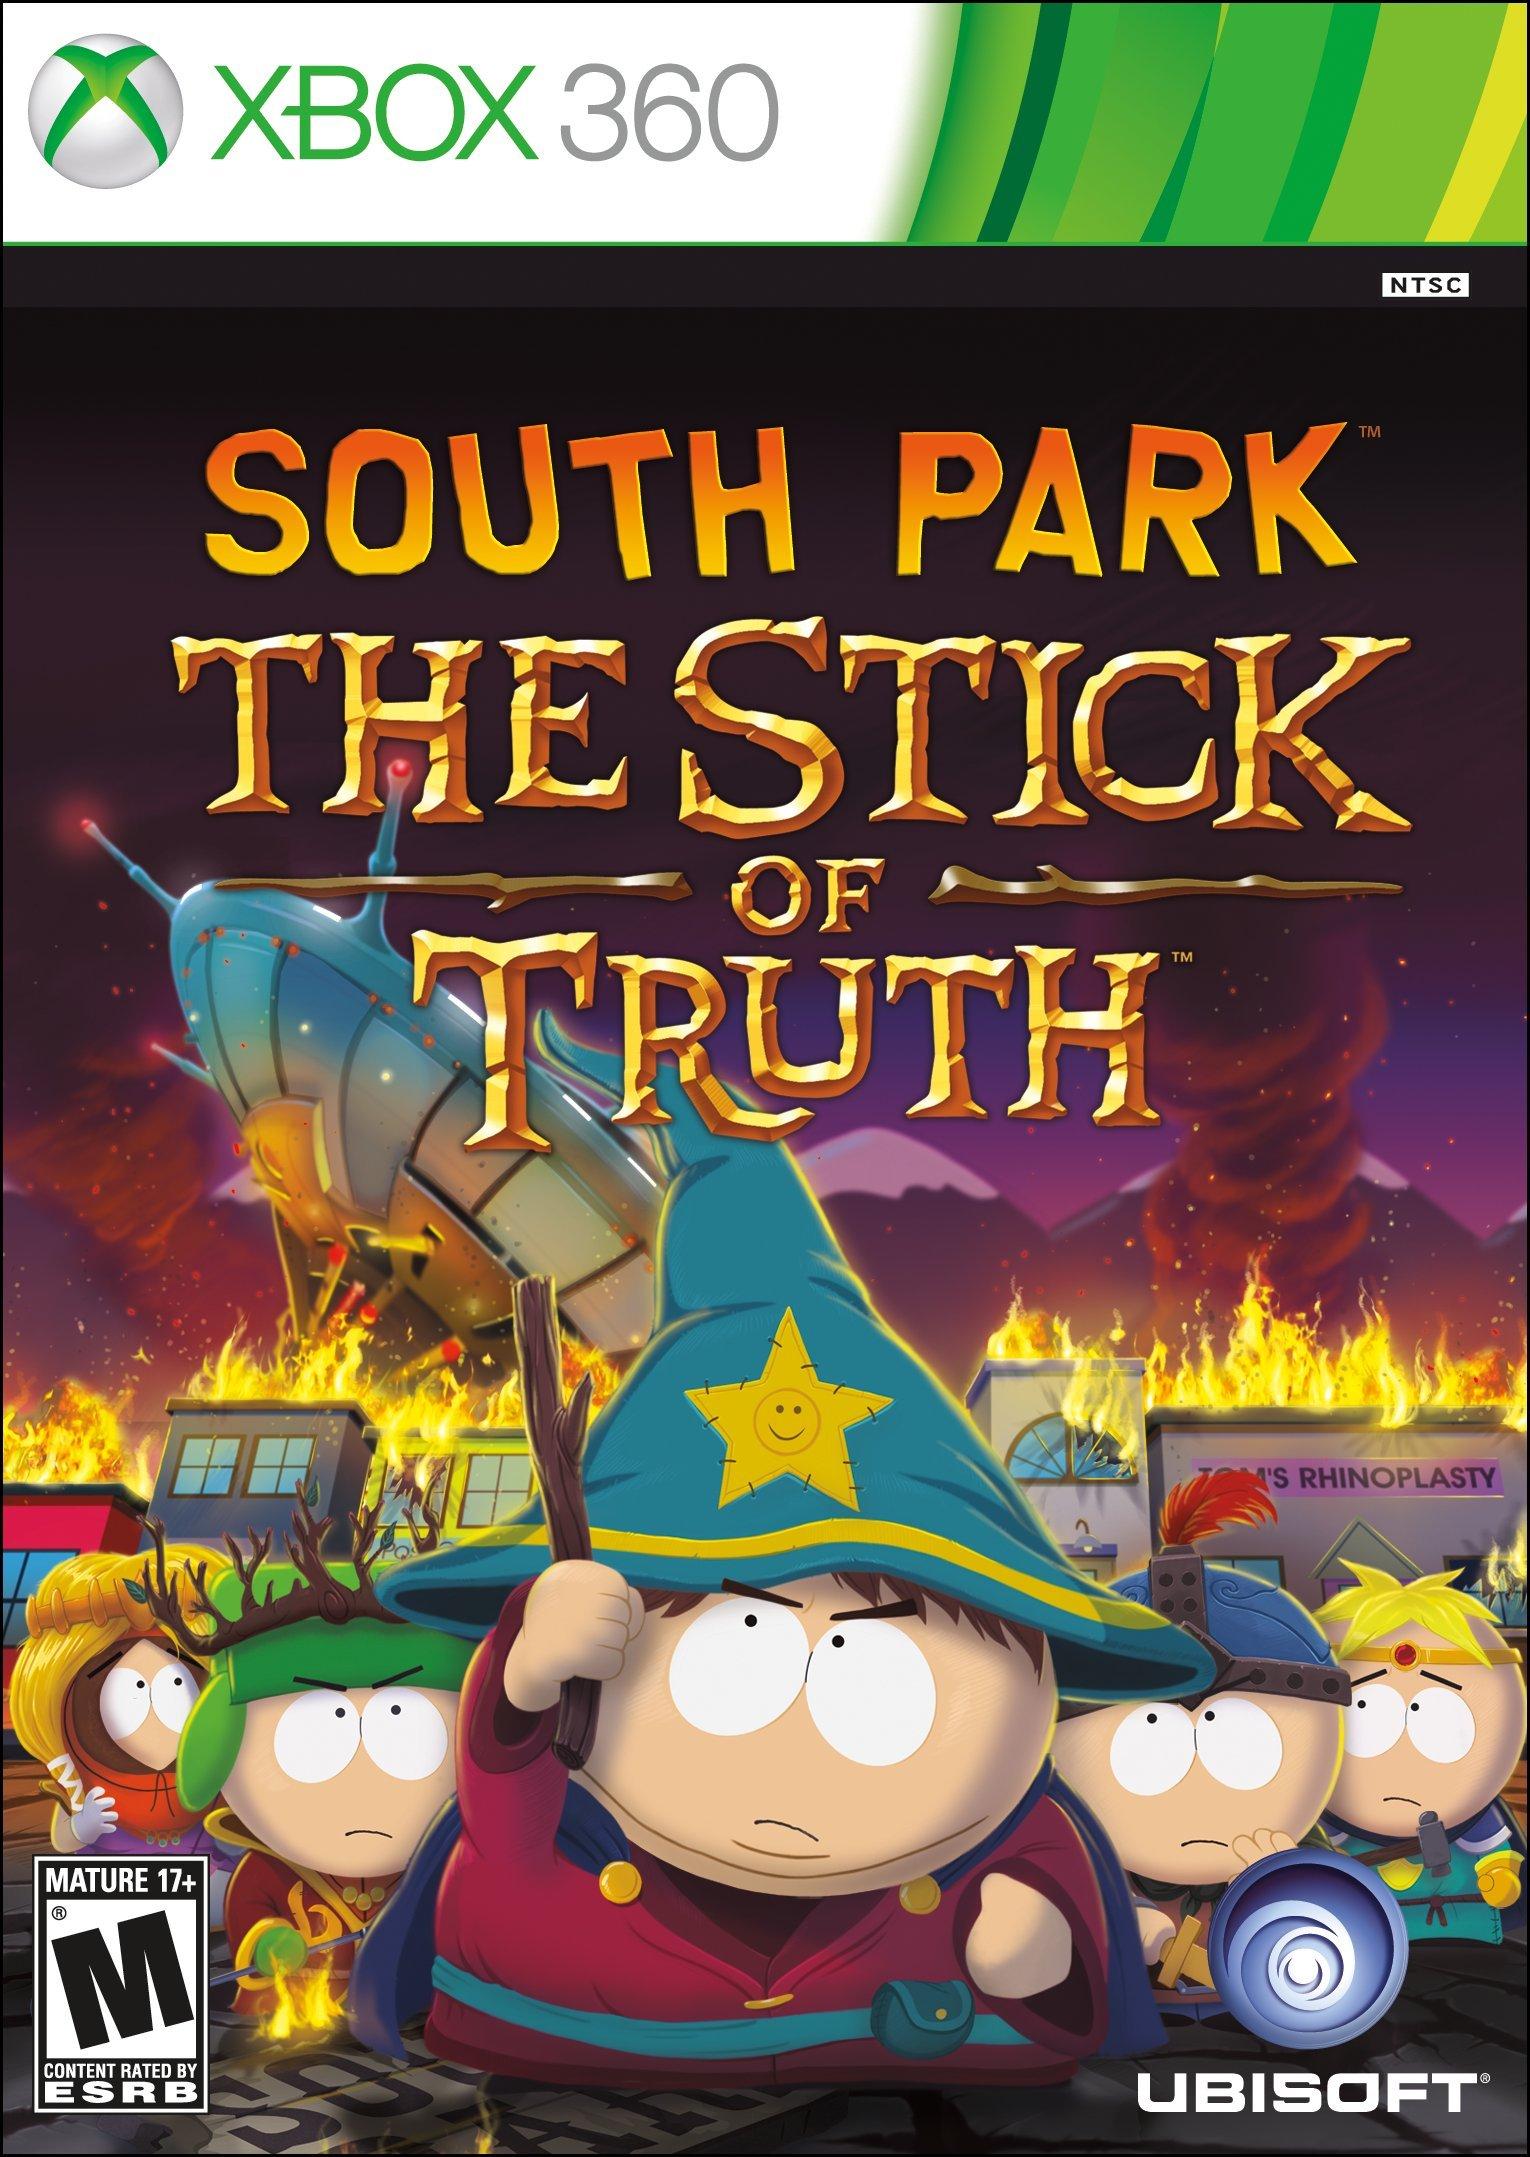 South Park: The Stick of Truth - PlayStation 4, PlayStation 4